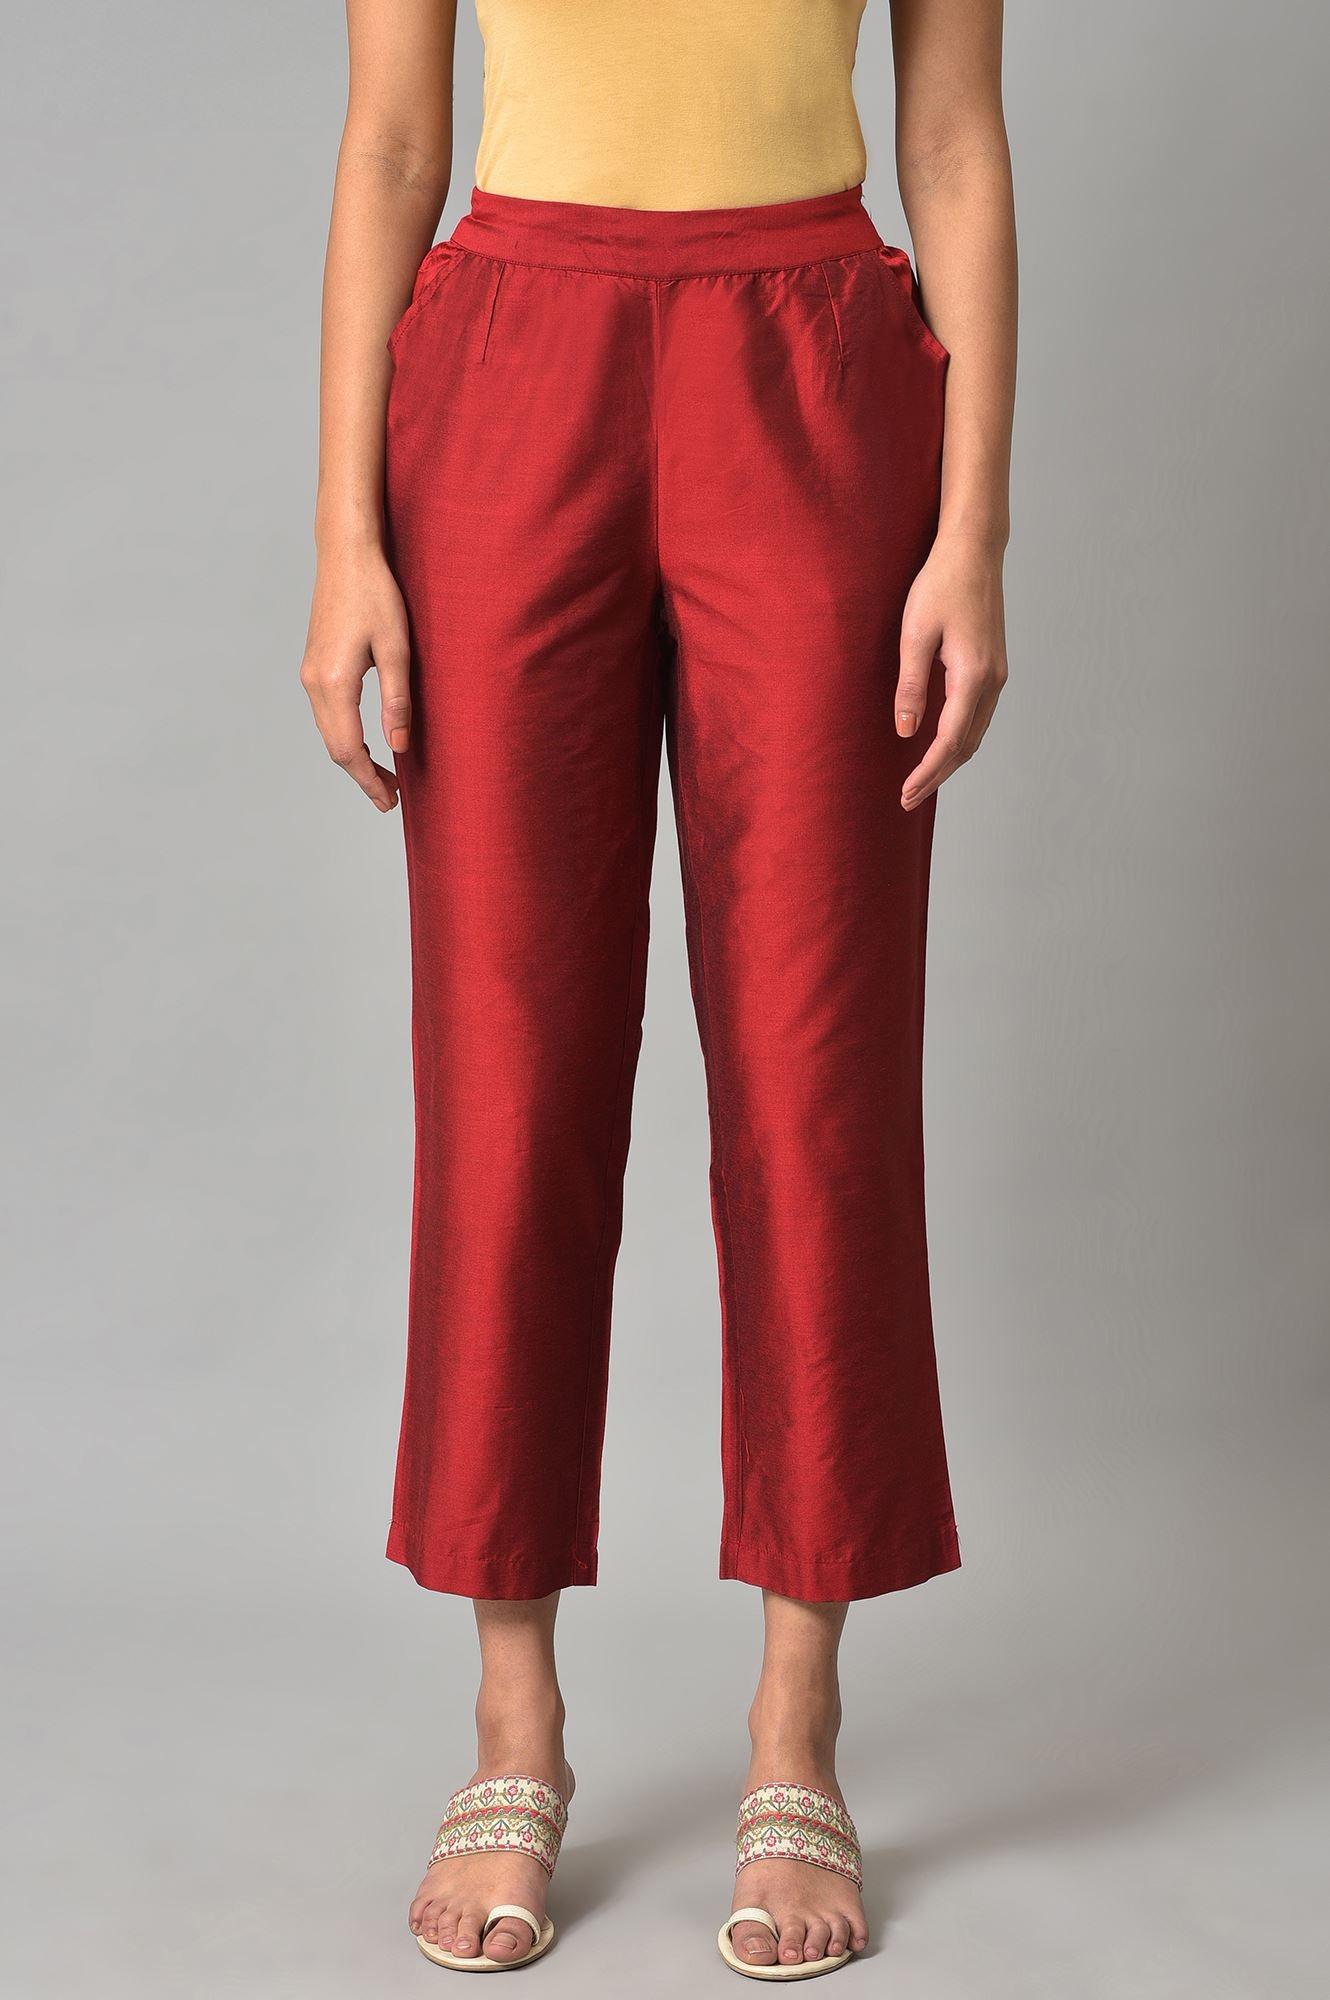 Red Solid Straight Women Pants - wforwoman